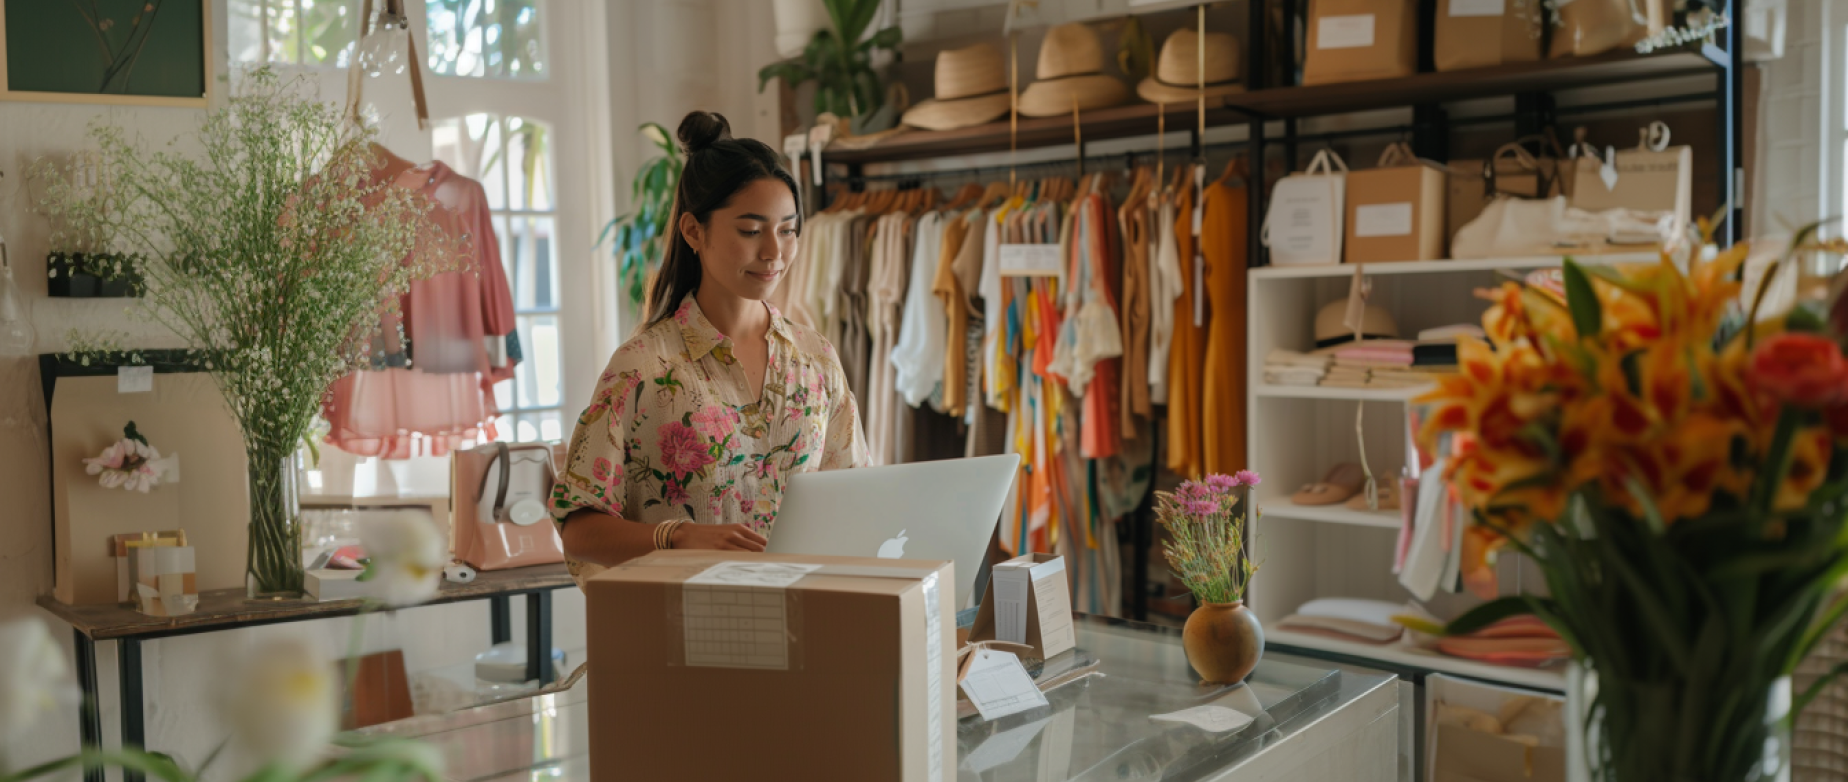 Woman smiling in her apparel store in front of her laptop fulfilling orders to ship to customers